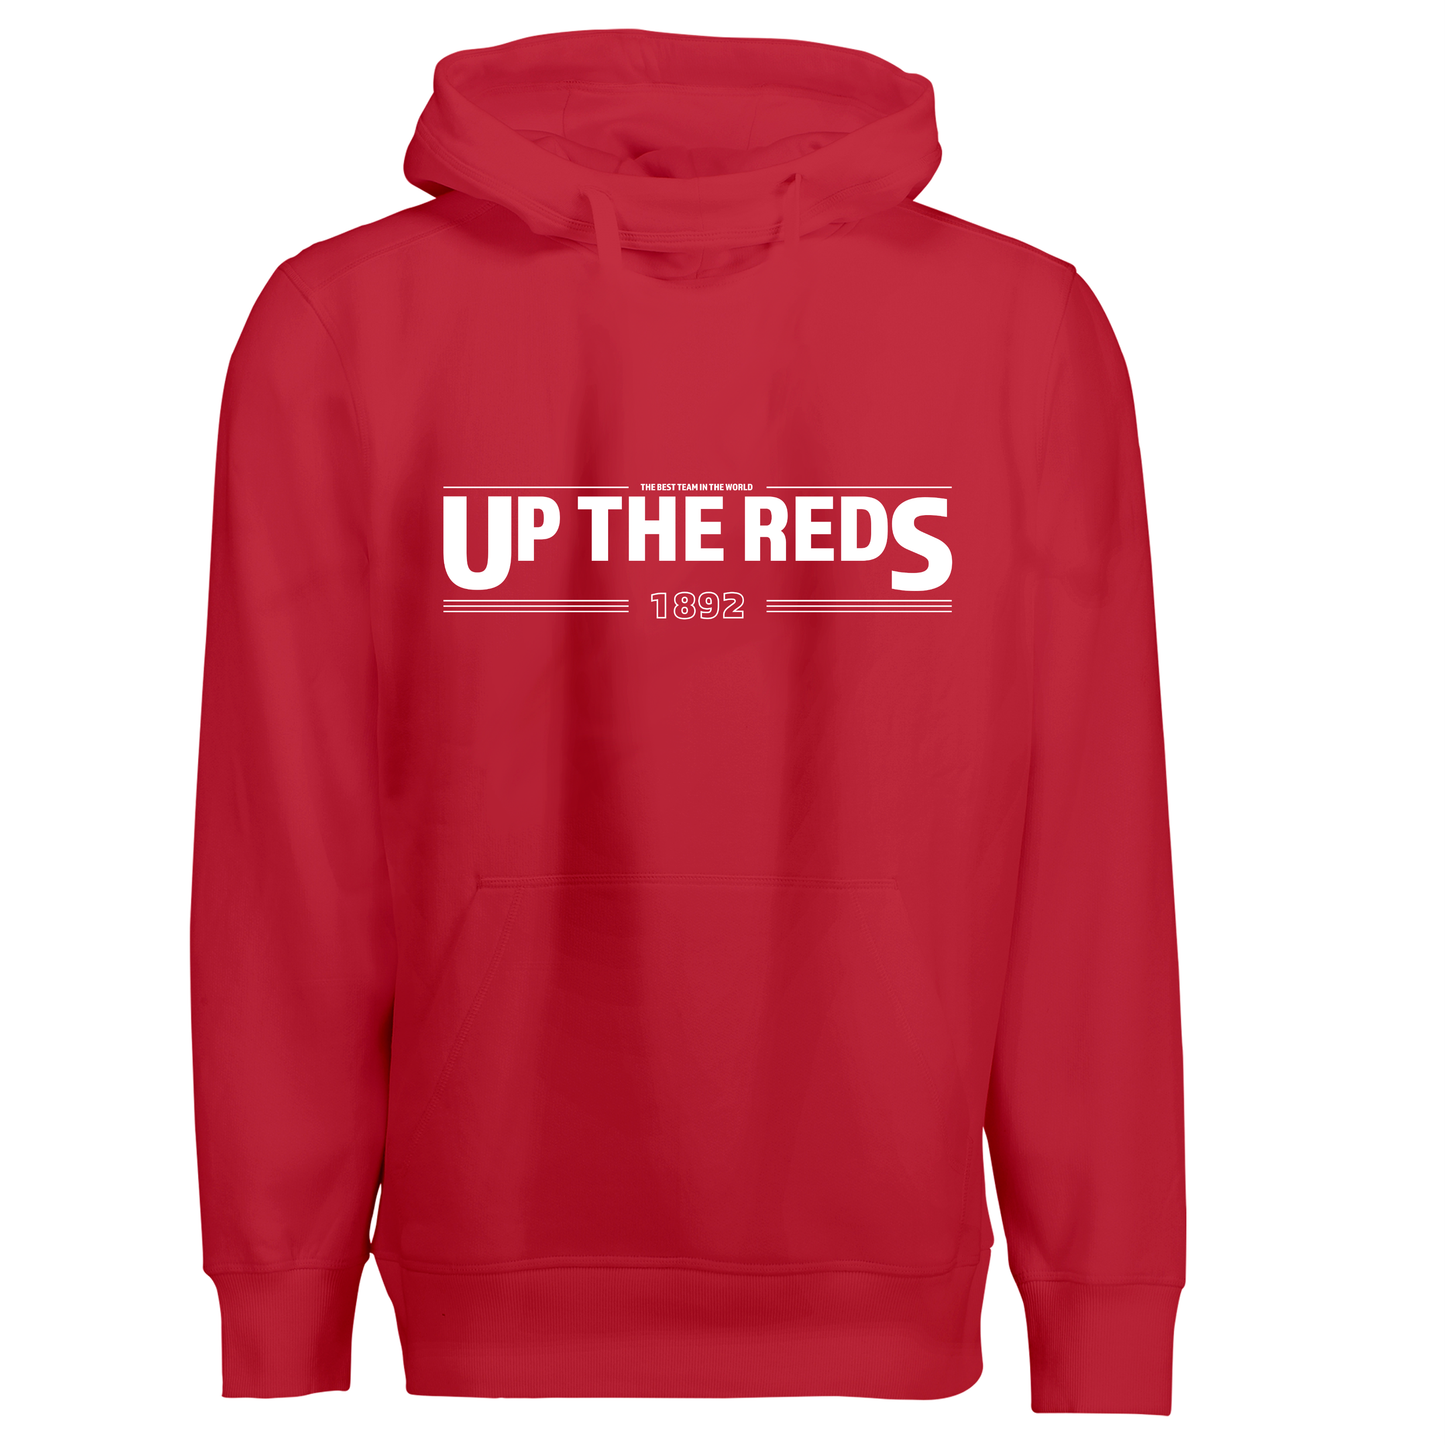 UP THE REDS - Hoodie